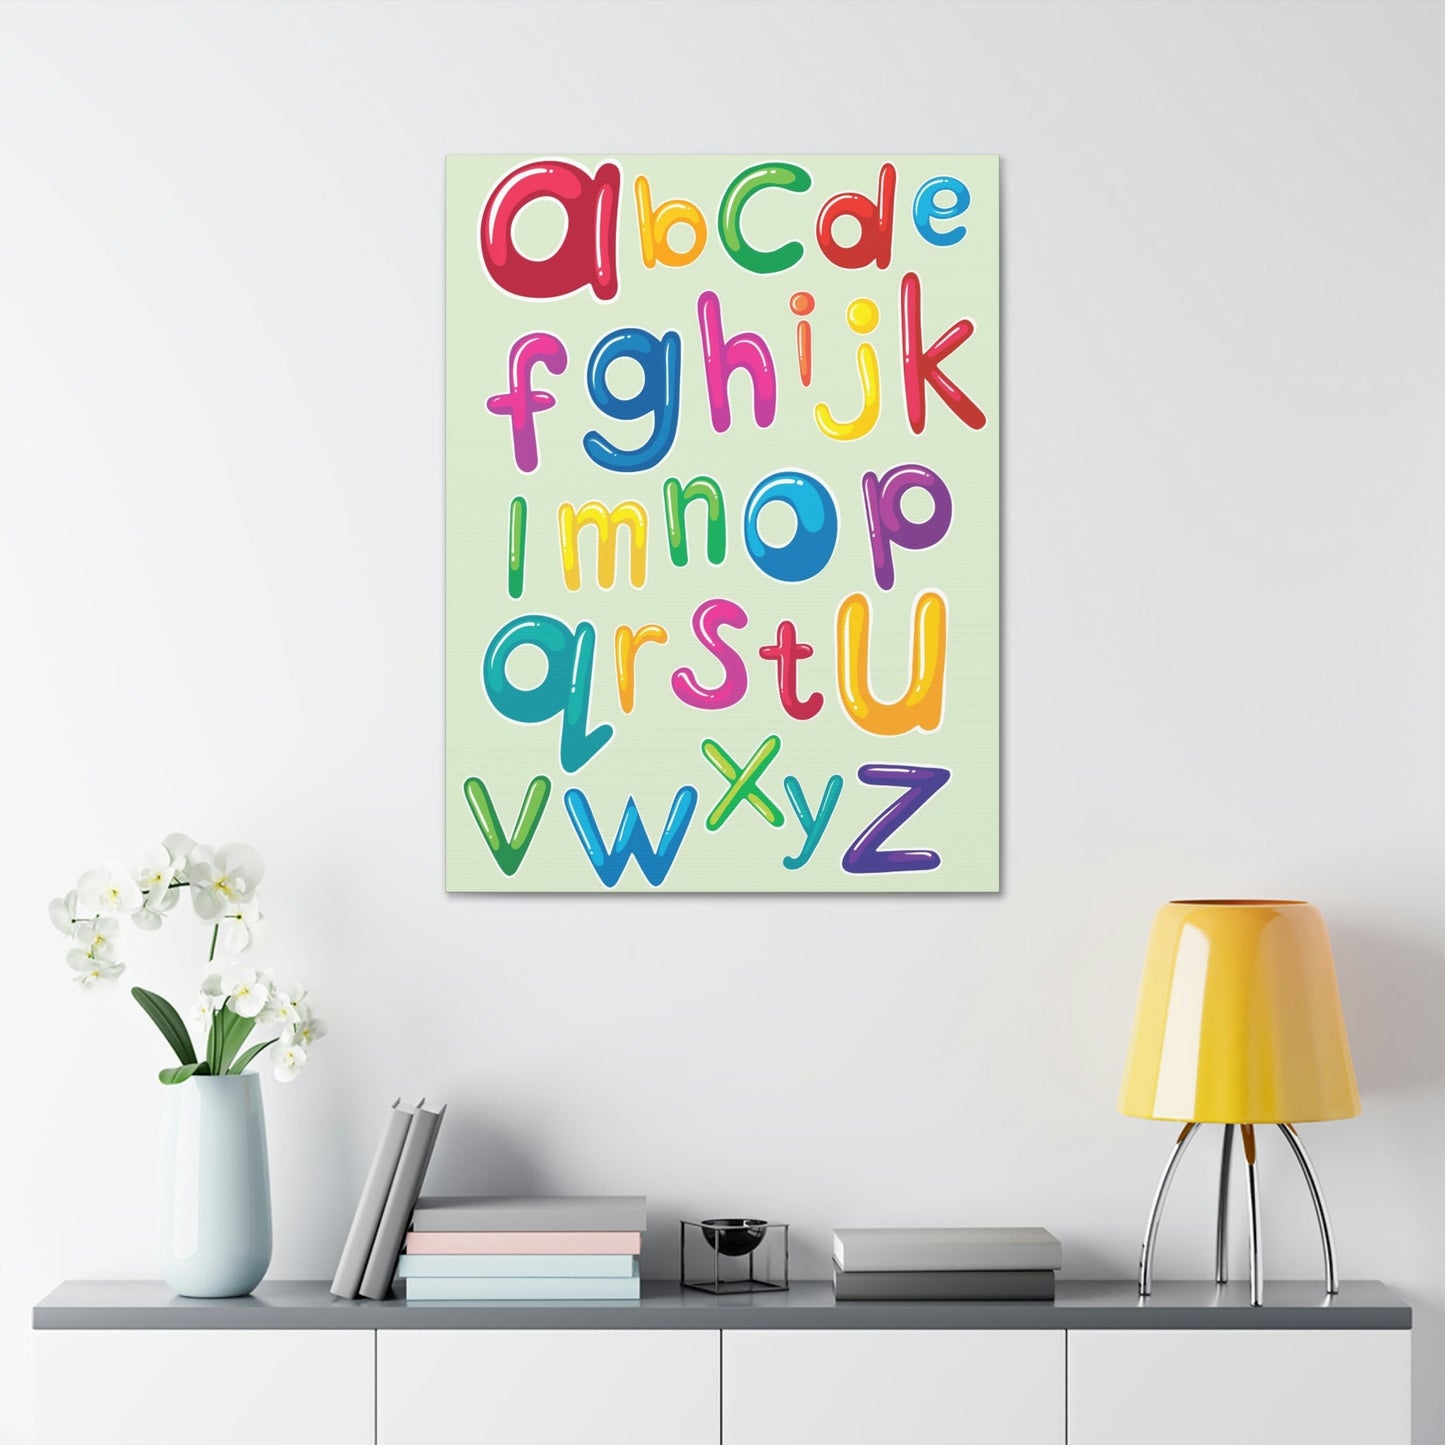 Fun and Whimsical: Colorful Framed Canvas and Posters for Kids' Rooms